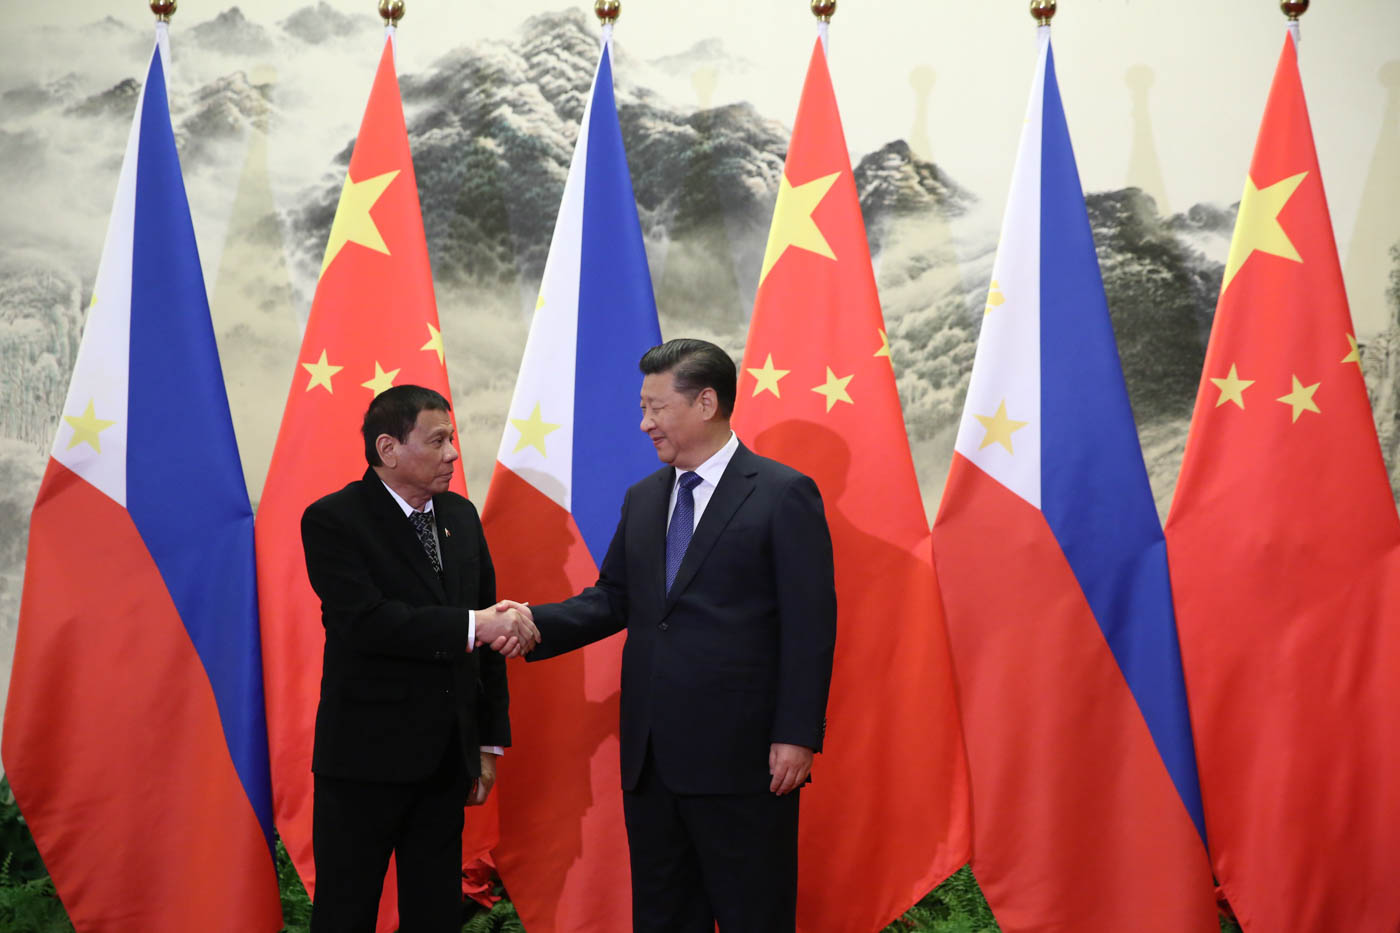 President Rodrigo Roa Duterte shakes hands with People’s Republic of China President Xi Jinping during October 2016 bilateral meetings at the Great Hall of the People, Beijing. PHOTO: PPD/King Rodriguez